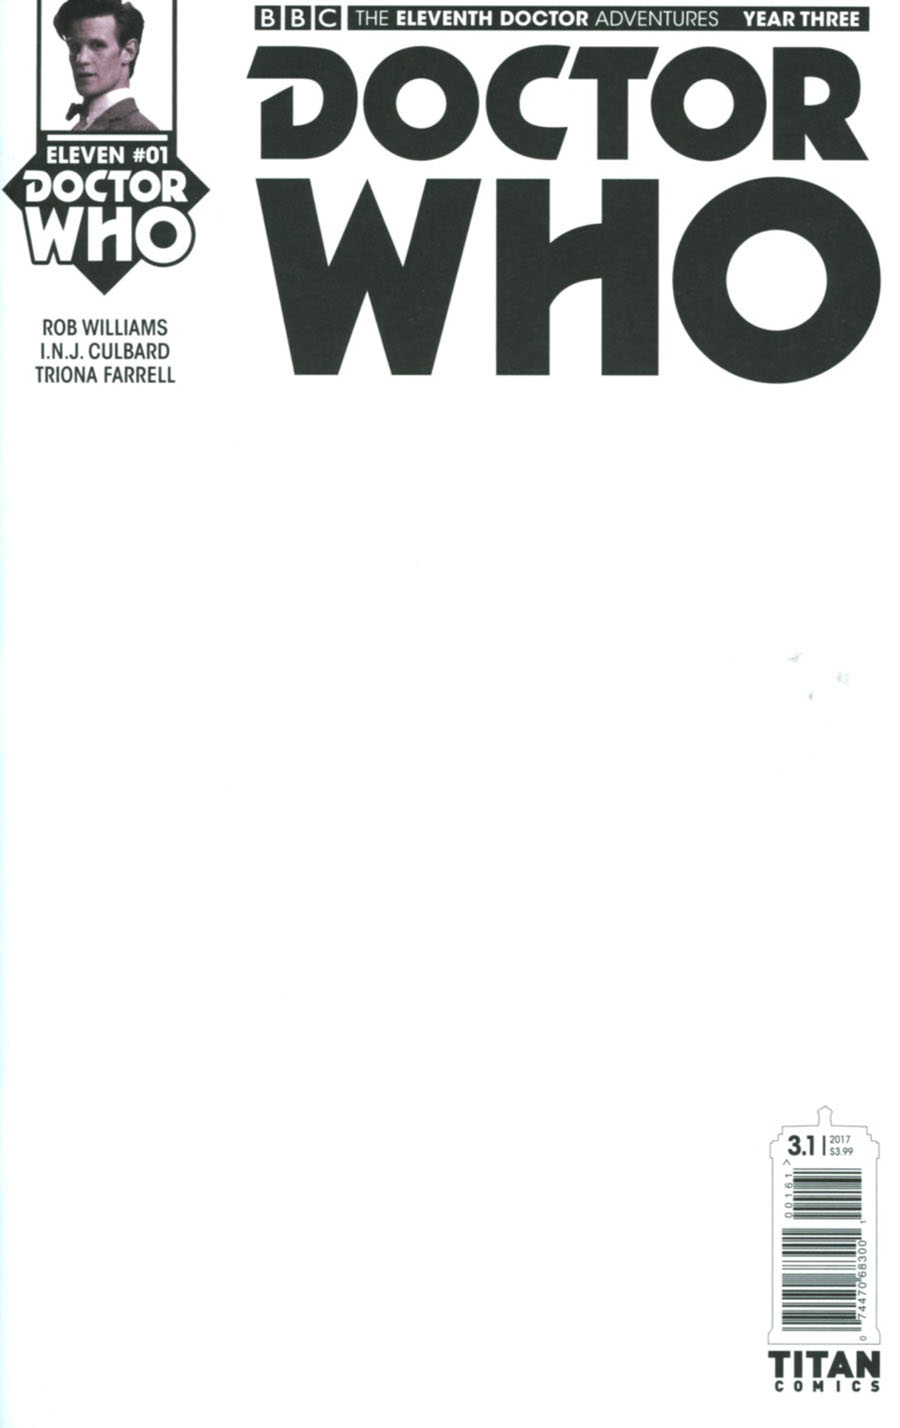 Doctor Who 11th Doctor Year Three #1 Cover F Variant Blank Cover